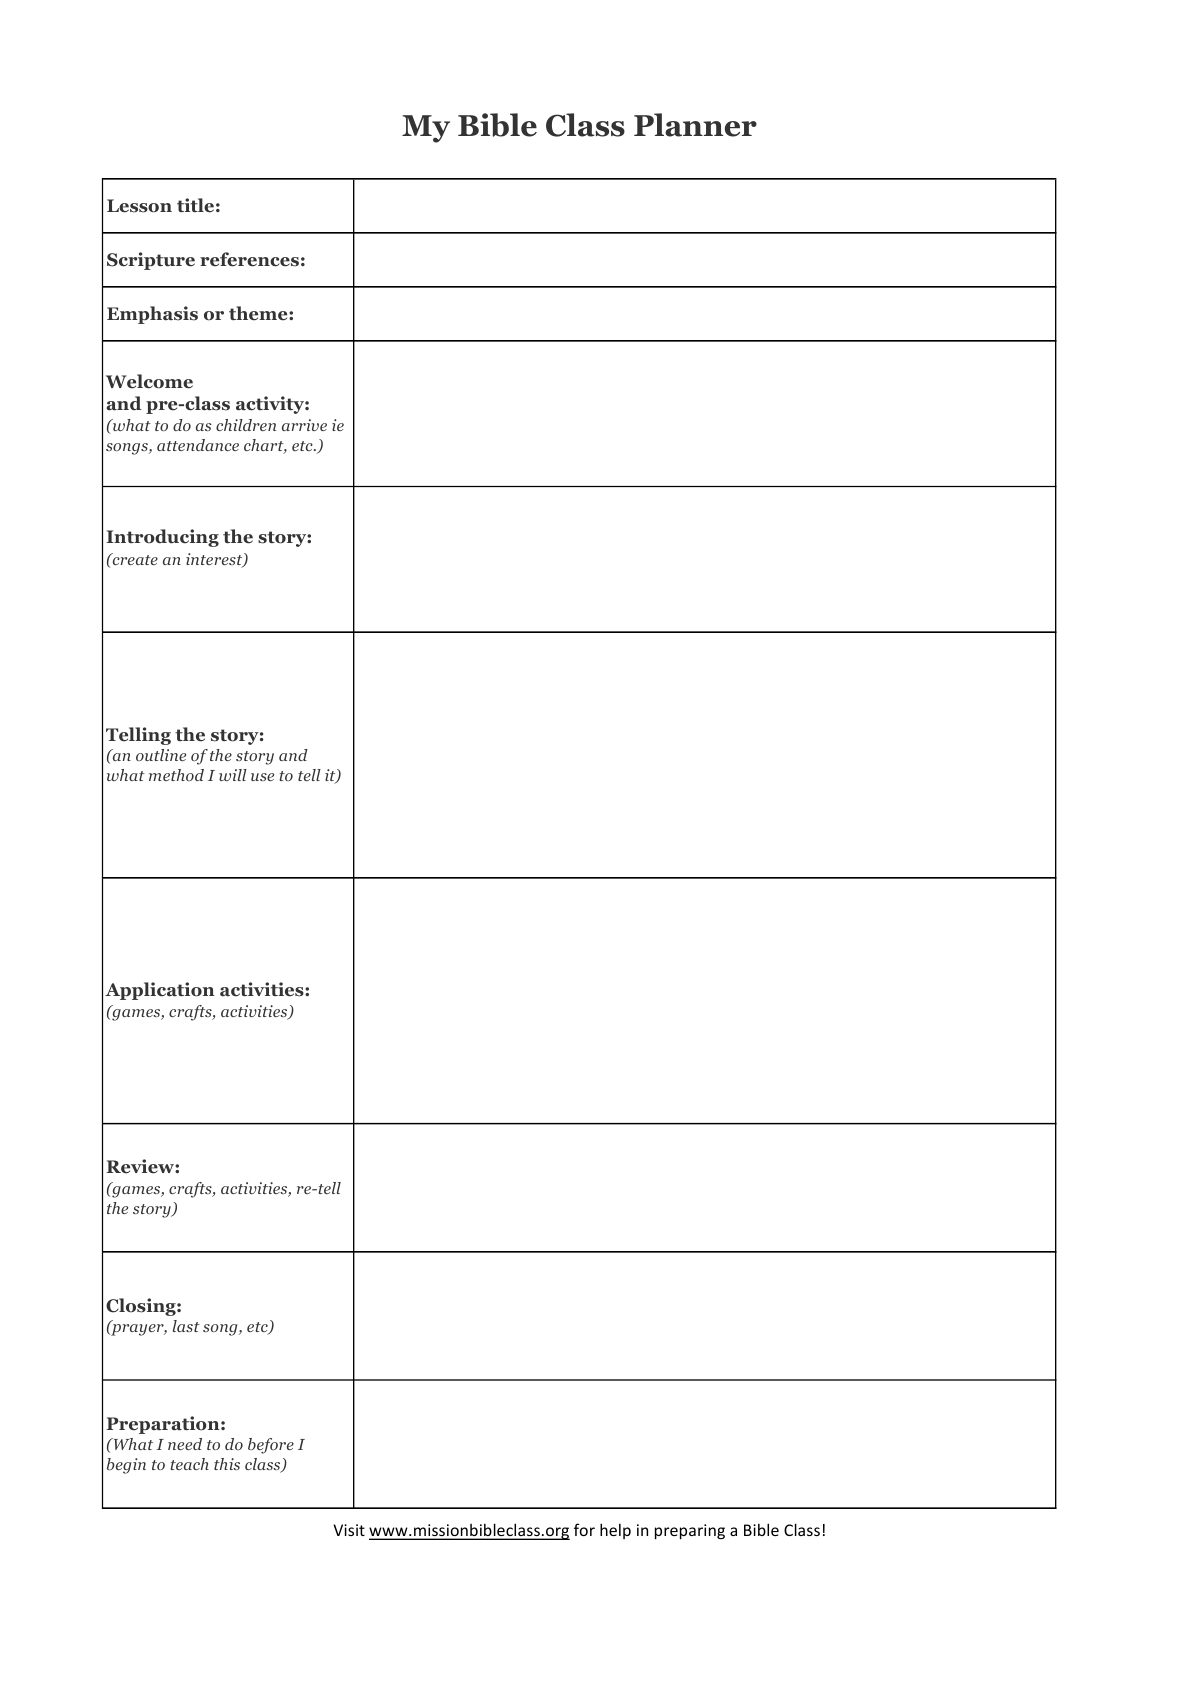 Blank Lesson Plan Templates To Print | Lesson Planning | Blank - Free Printable Sunday School Lessons For Teens